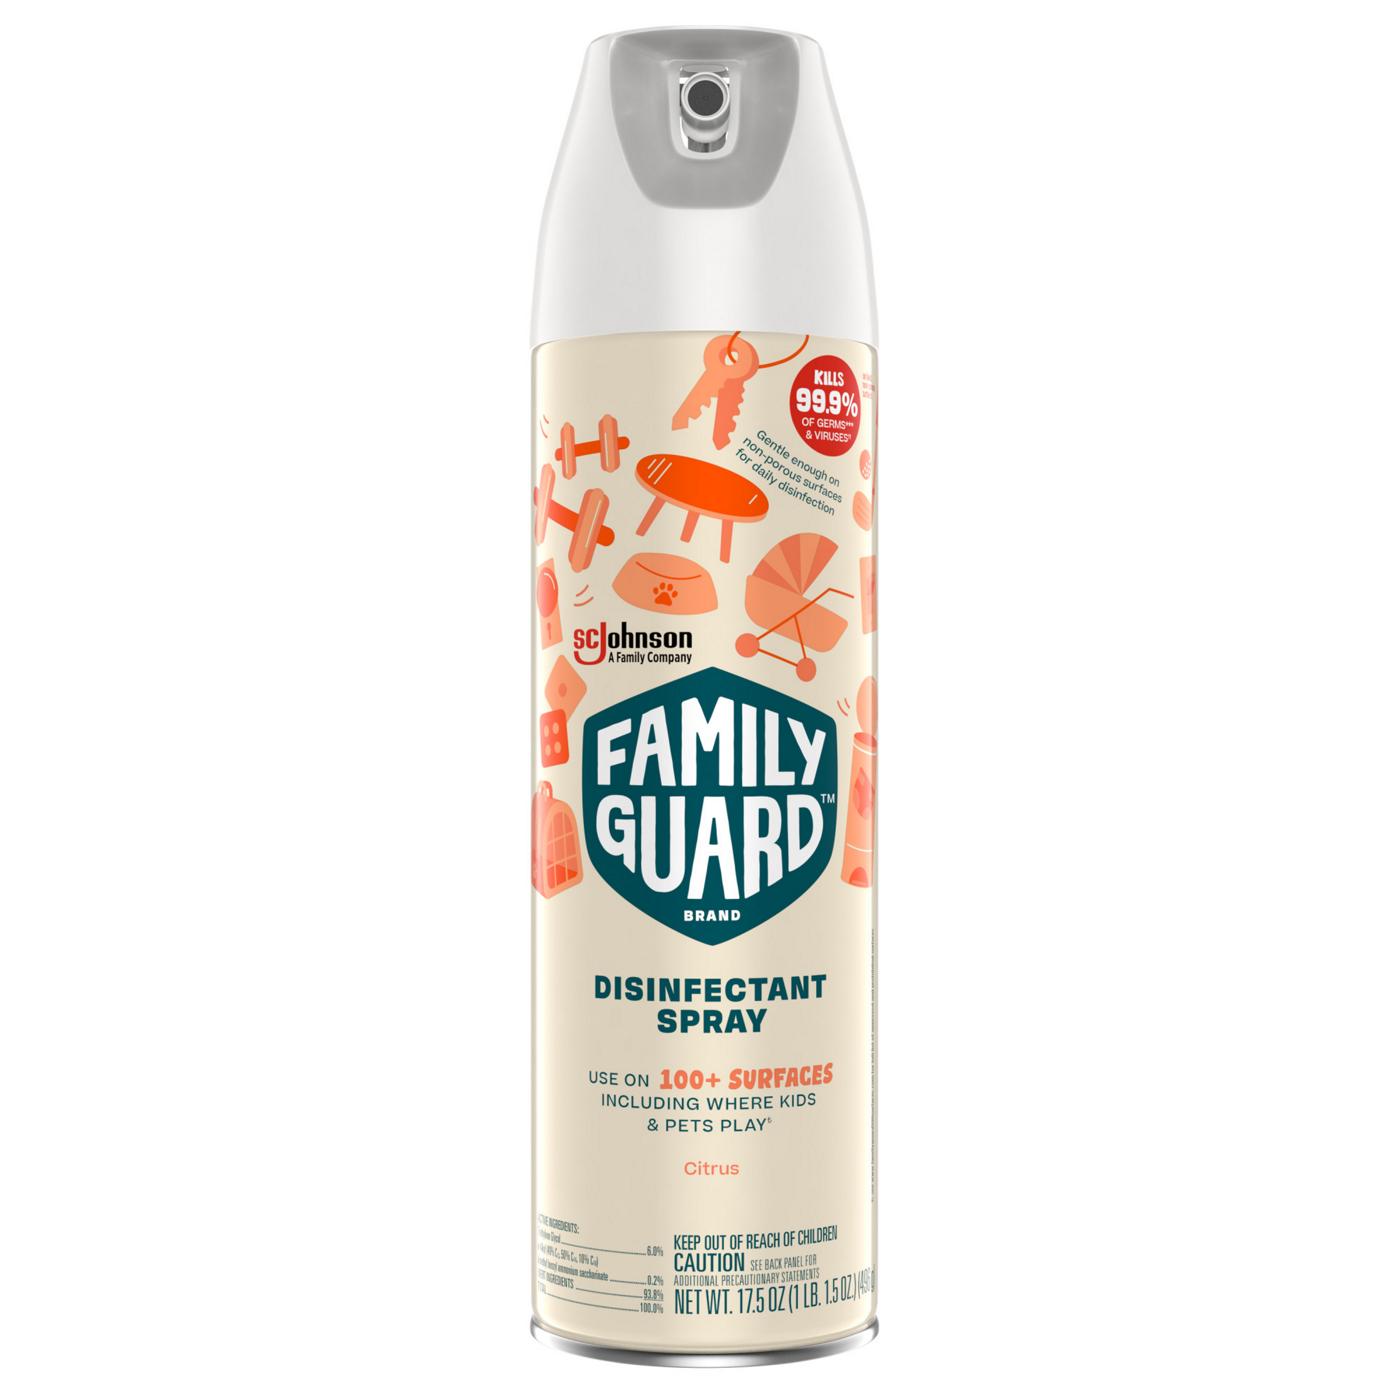 Family Guard Citrus Disinfectant Spray; image 1 of 11